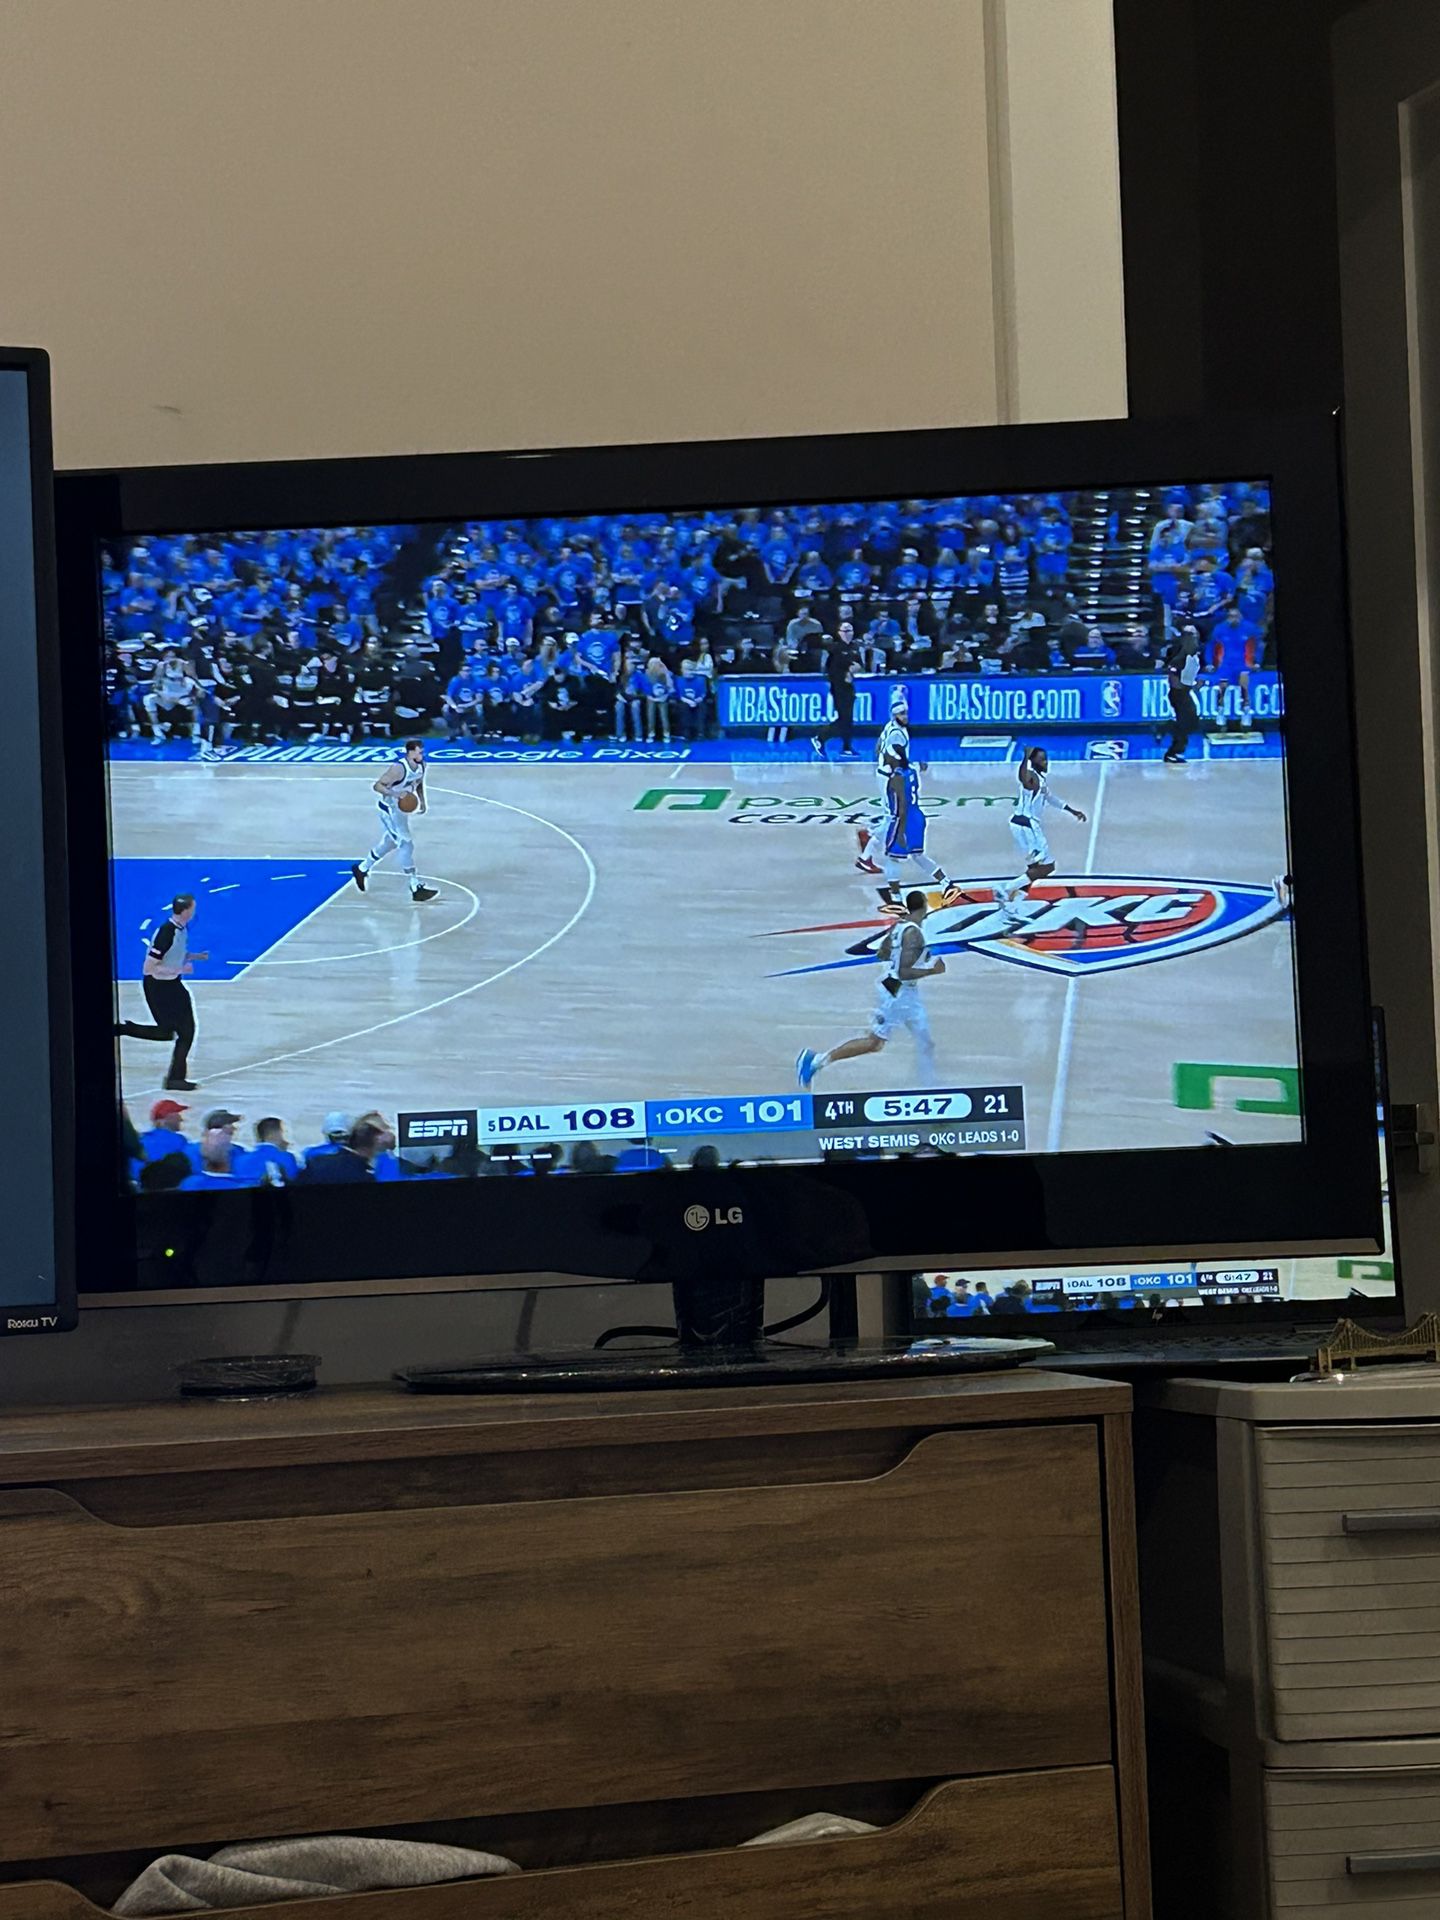 40 inch flat screen (works Great)